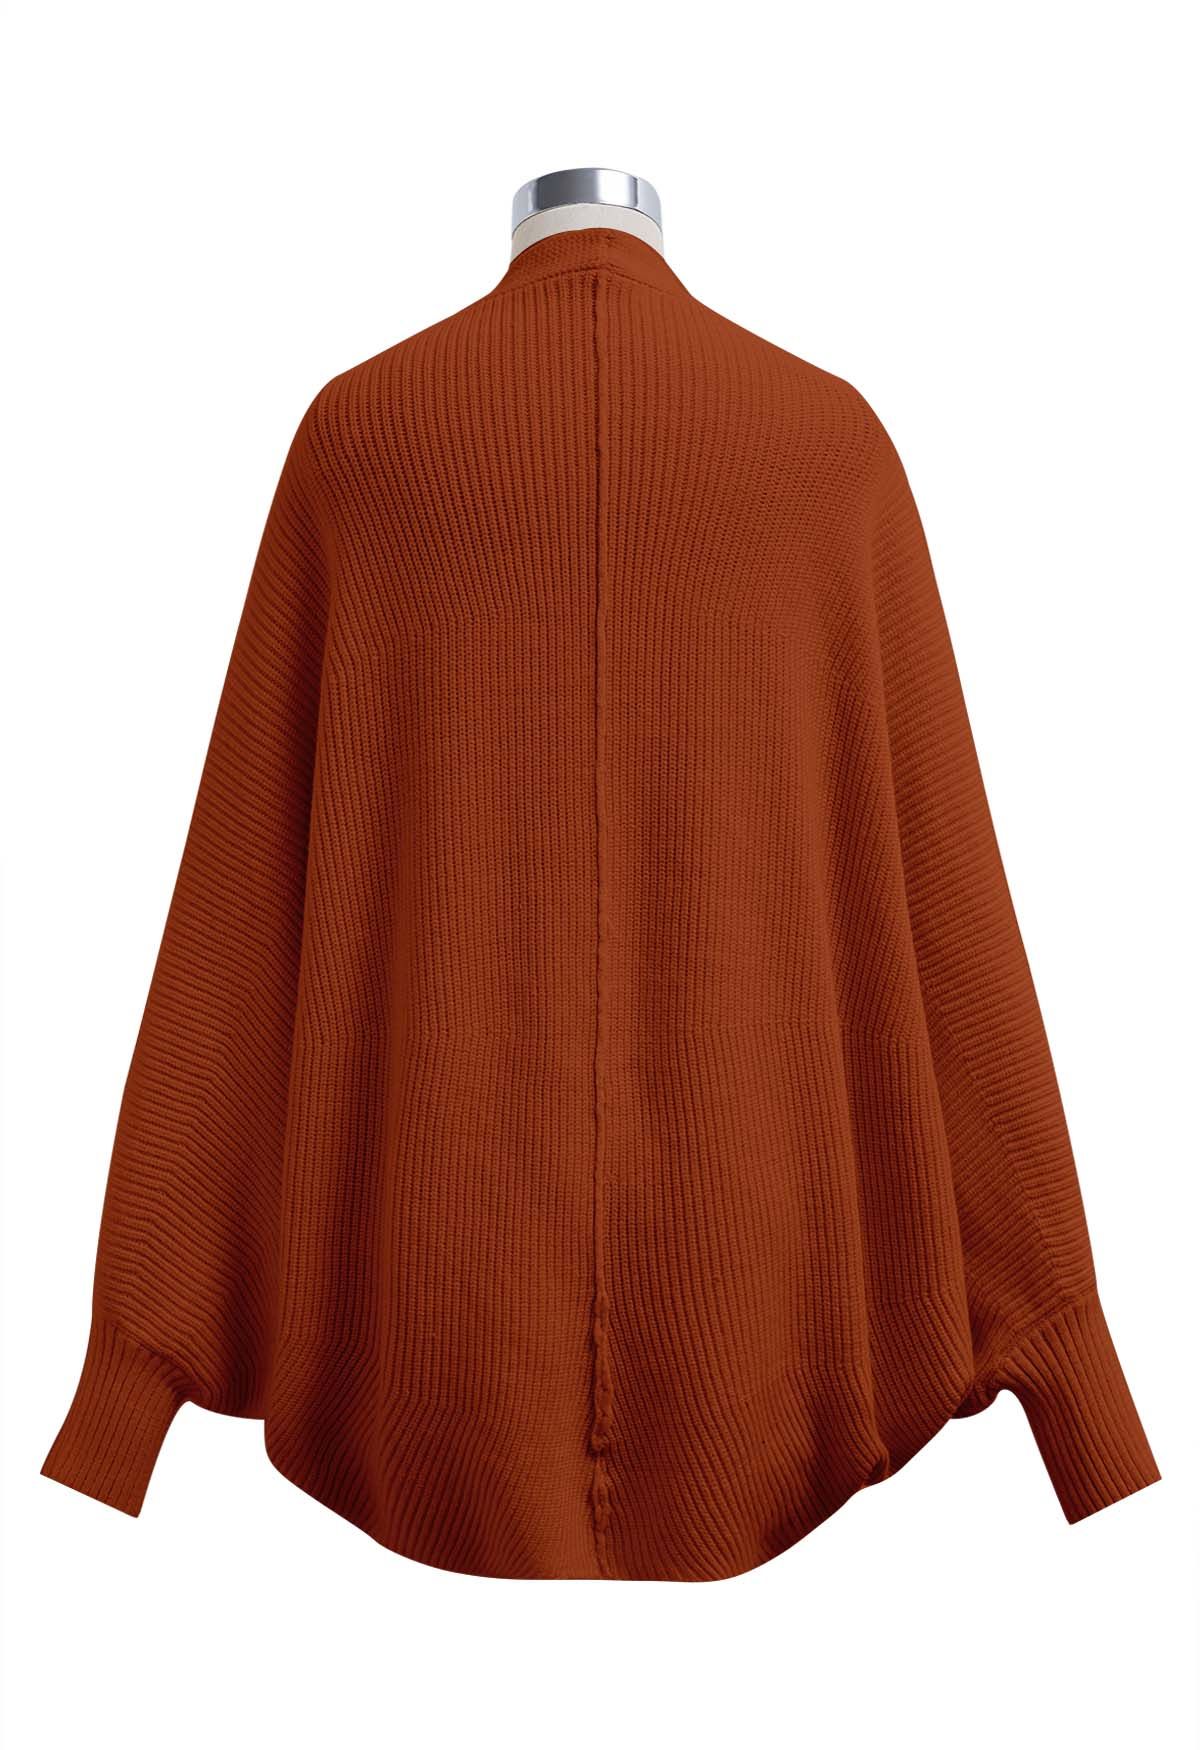 Batwing Sleeves Open Front Knit Cardigan in Caramel